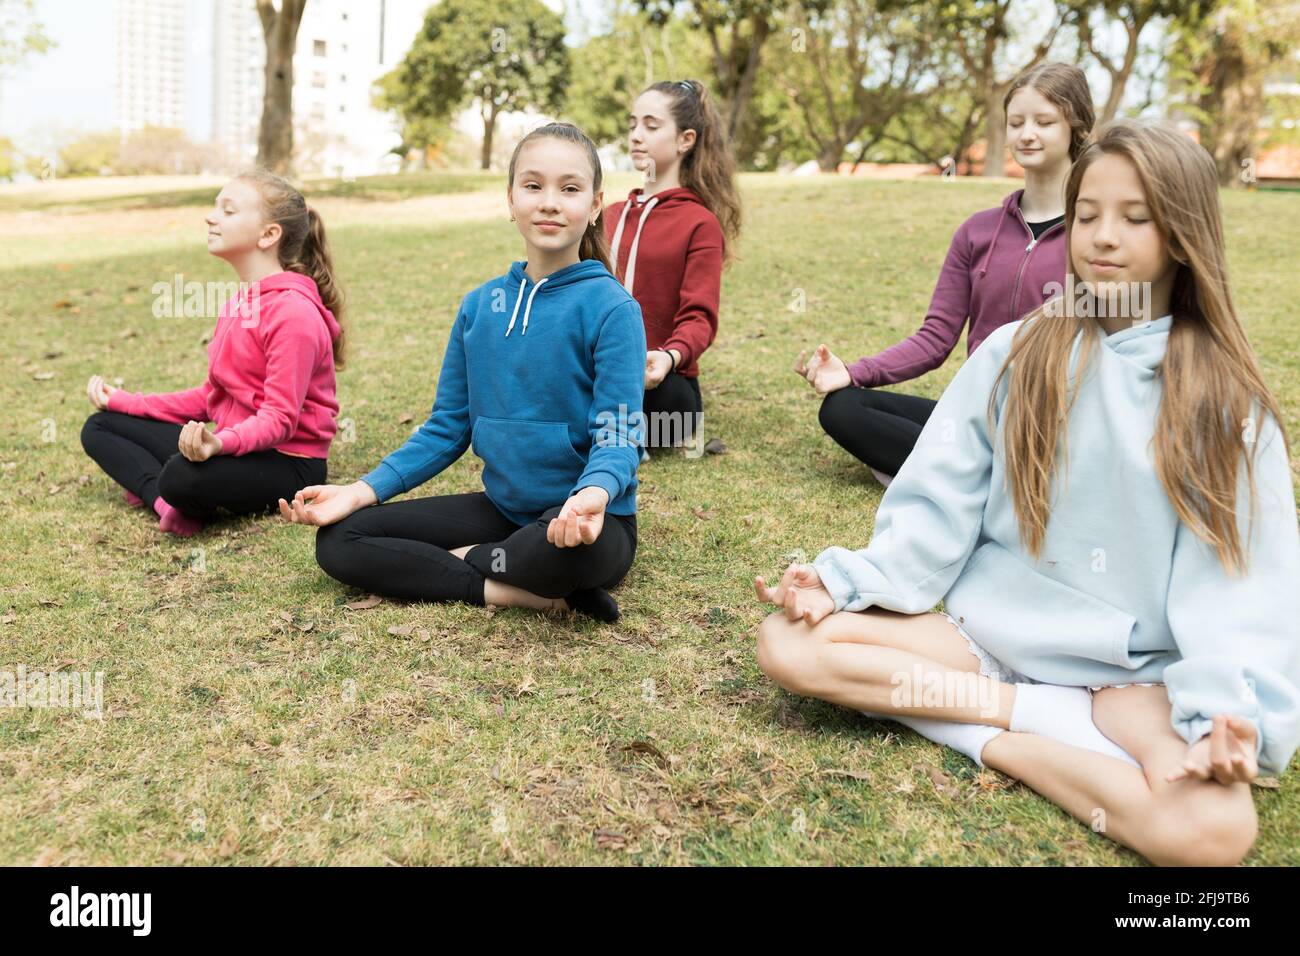 Group of girls bpracticing yoga outside Stock Photo